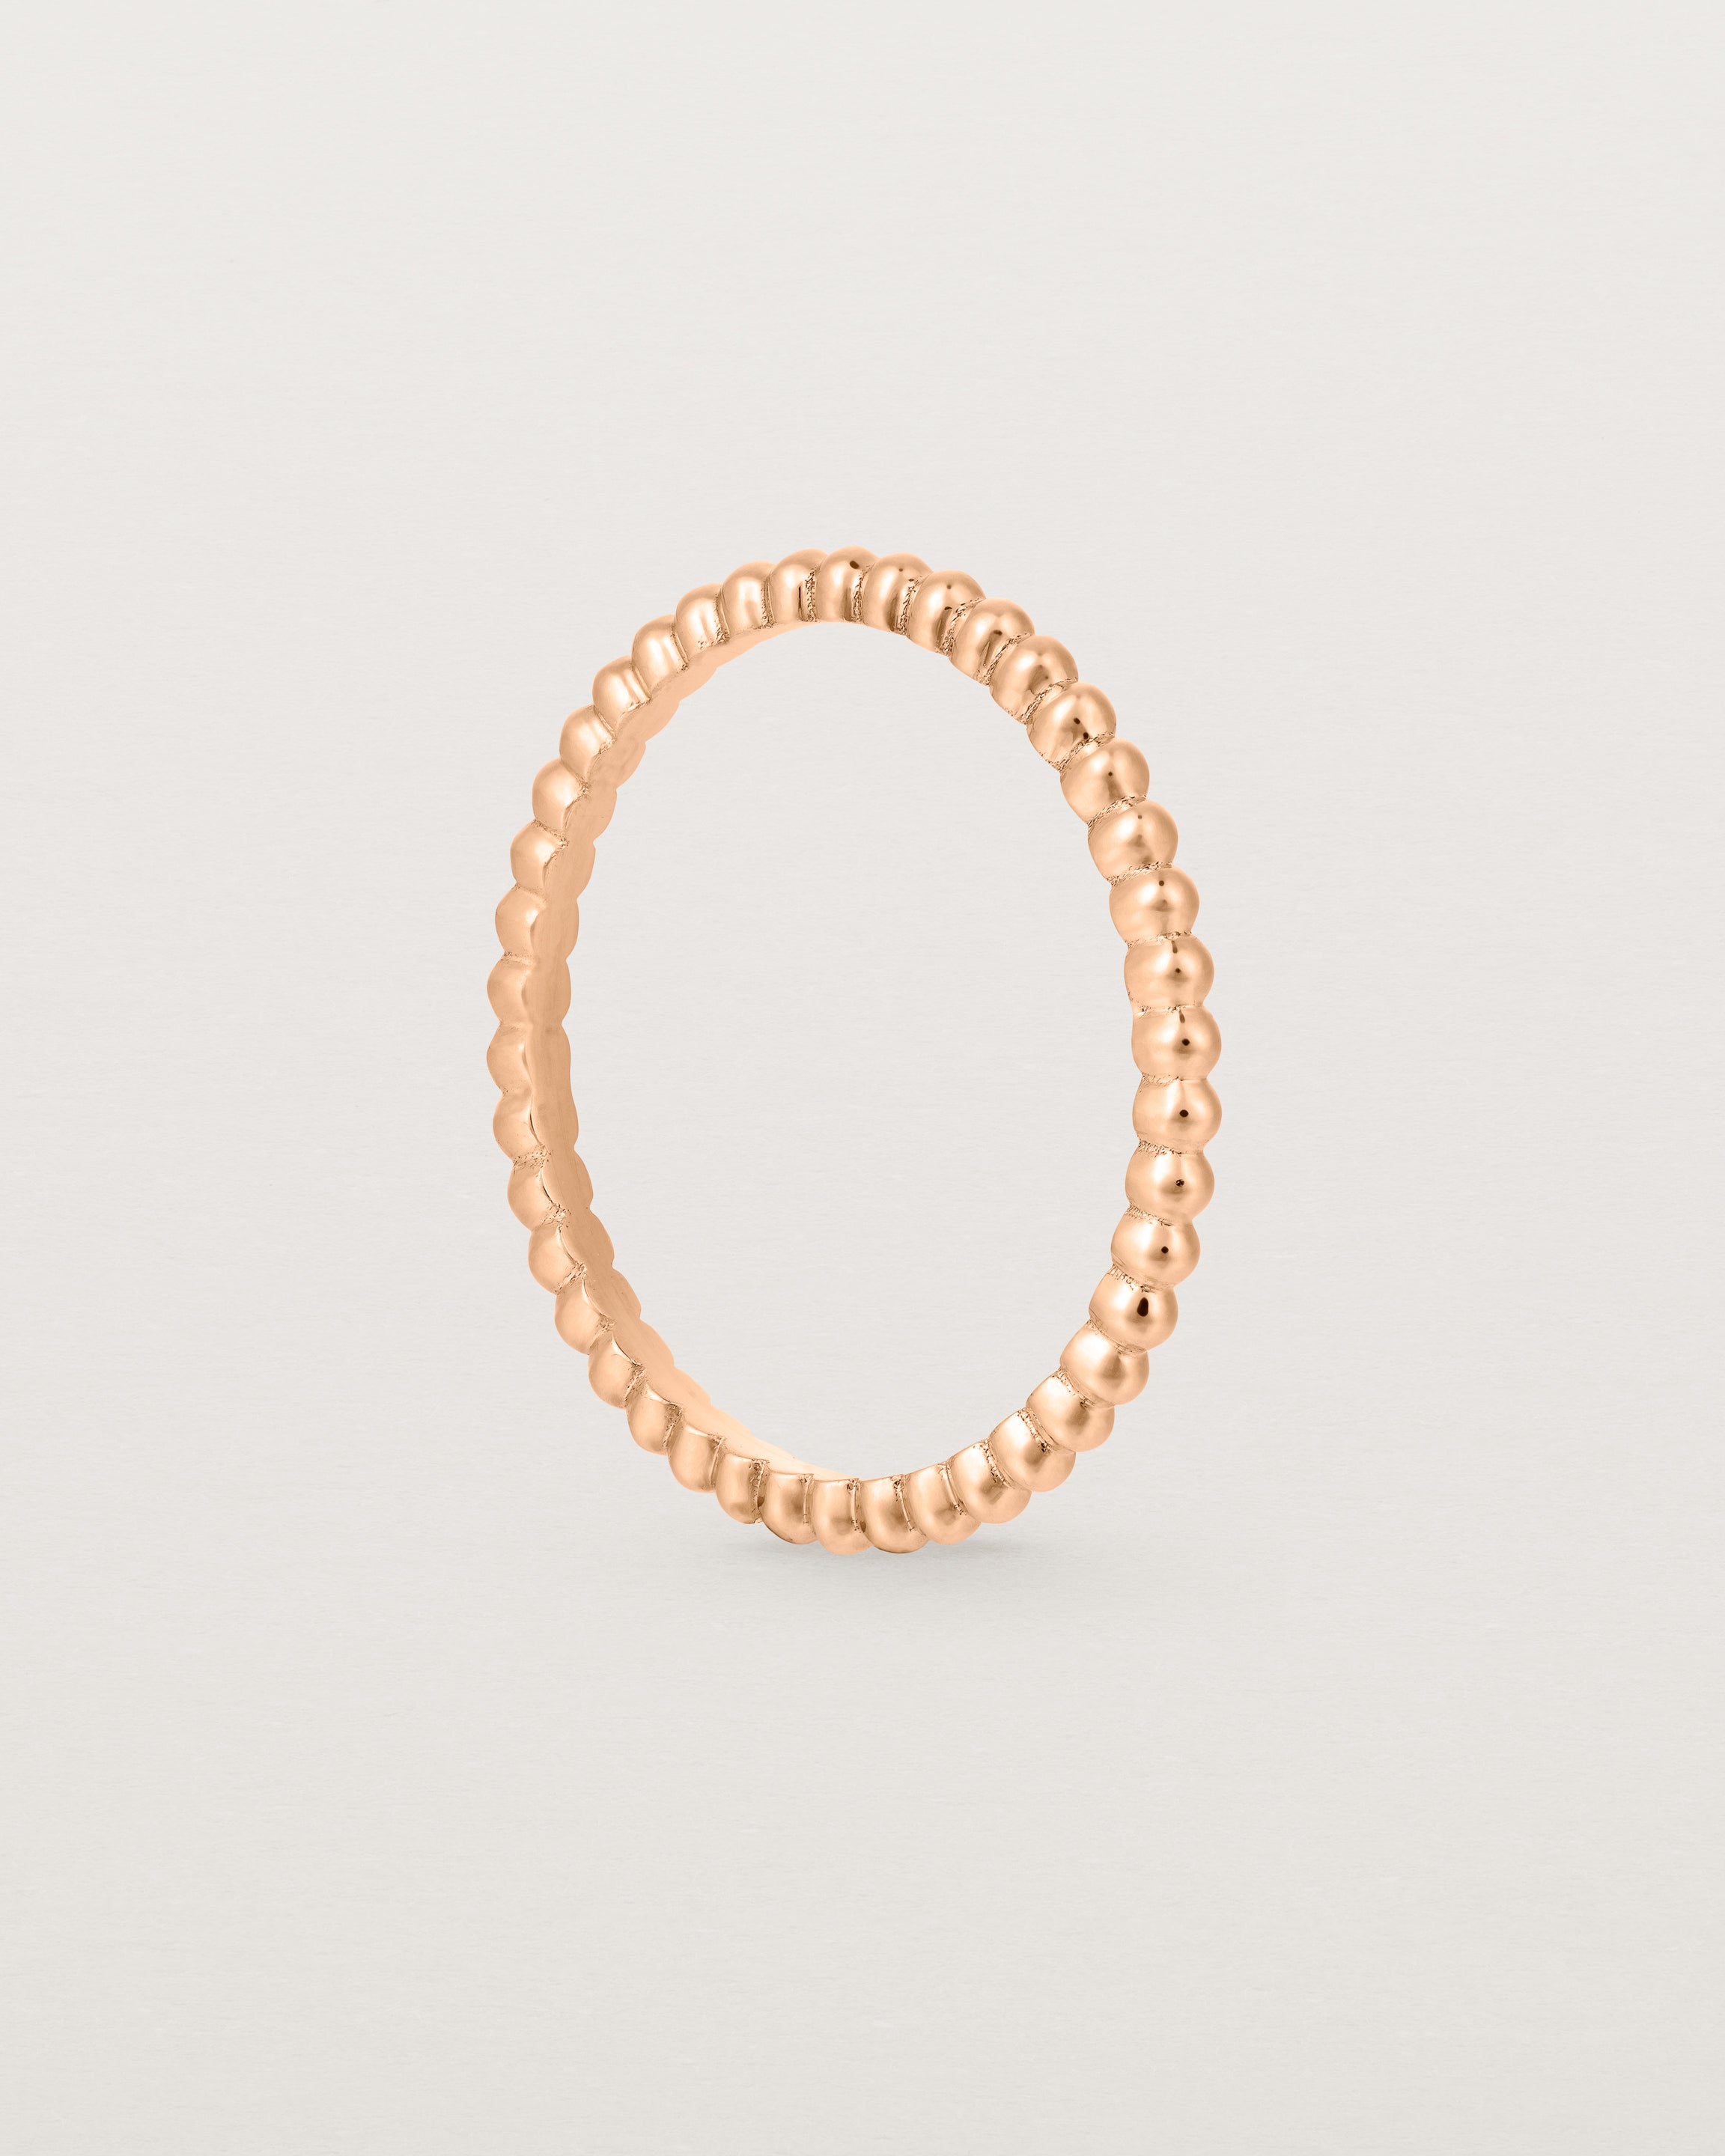 Standing view of the Dotted Stacking Ring in Rose Gold.